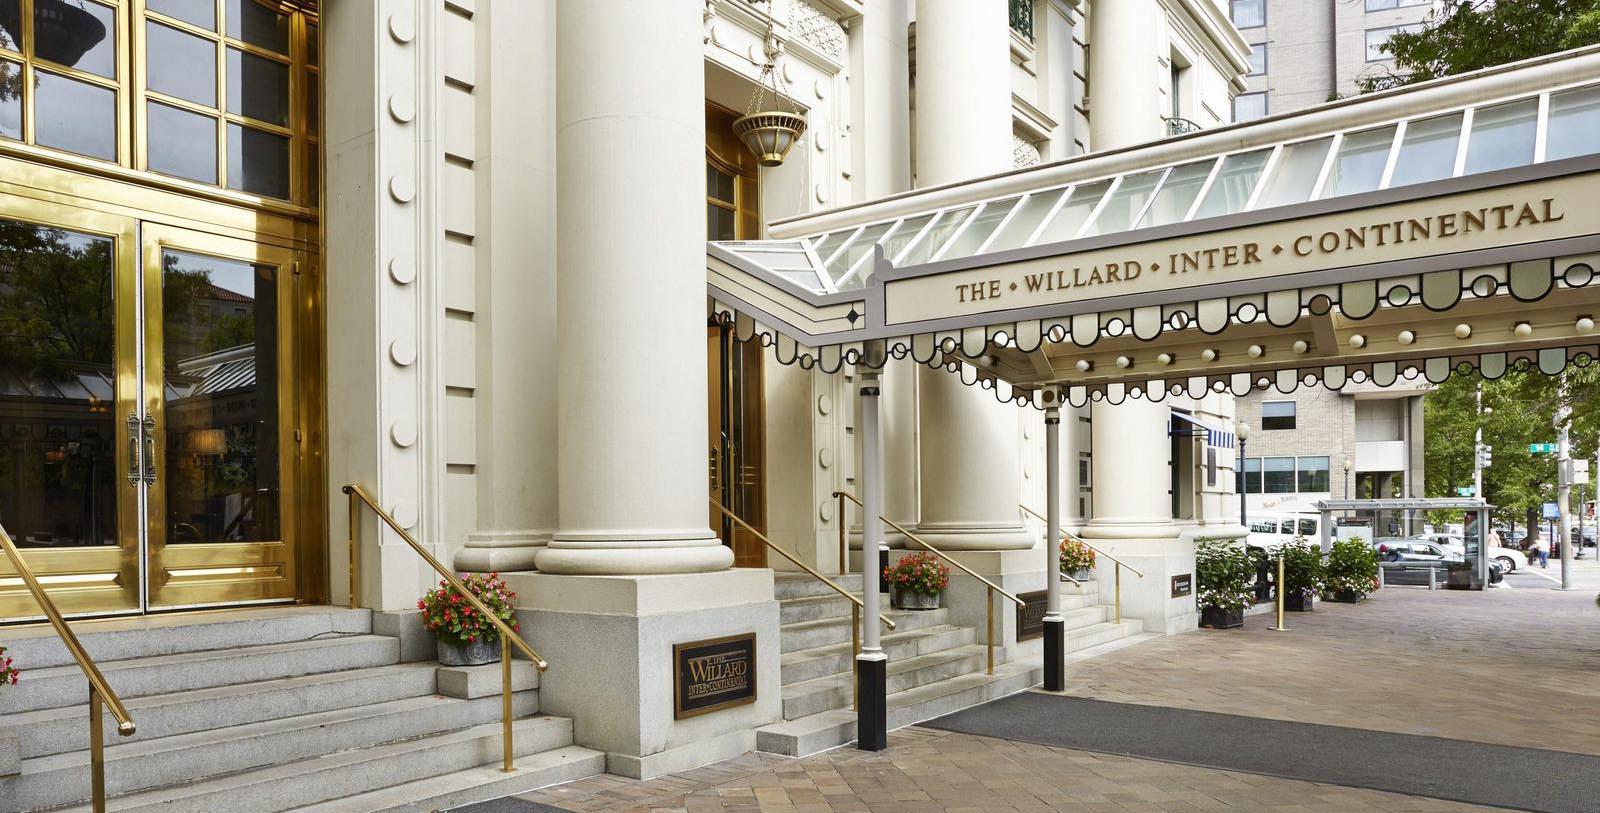 Discover the grand lobby of The Willard InterContinental, Washington DC and its coffered ceilings, Corinthian columns, rare mosaic floors, brass chandeliers, and intricate woodwork.